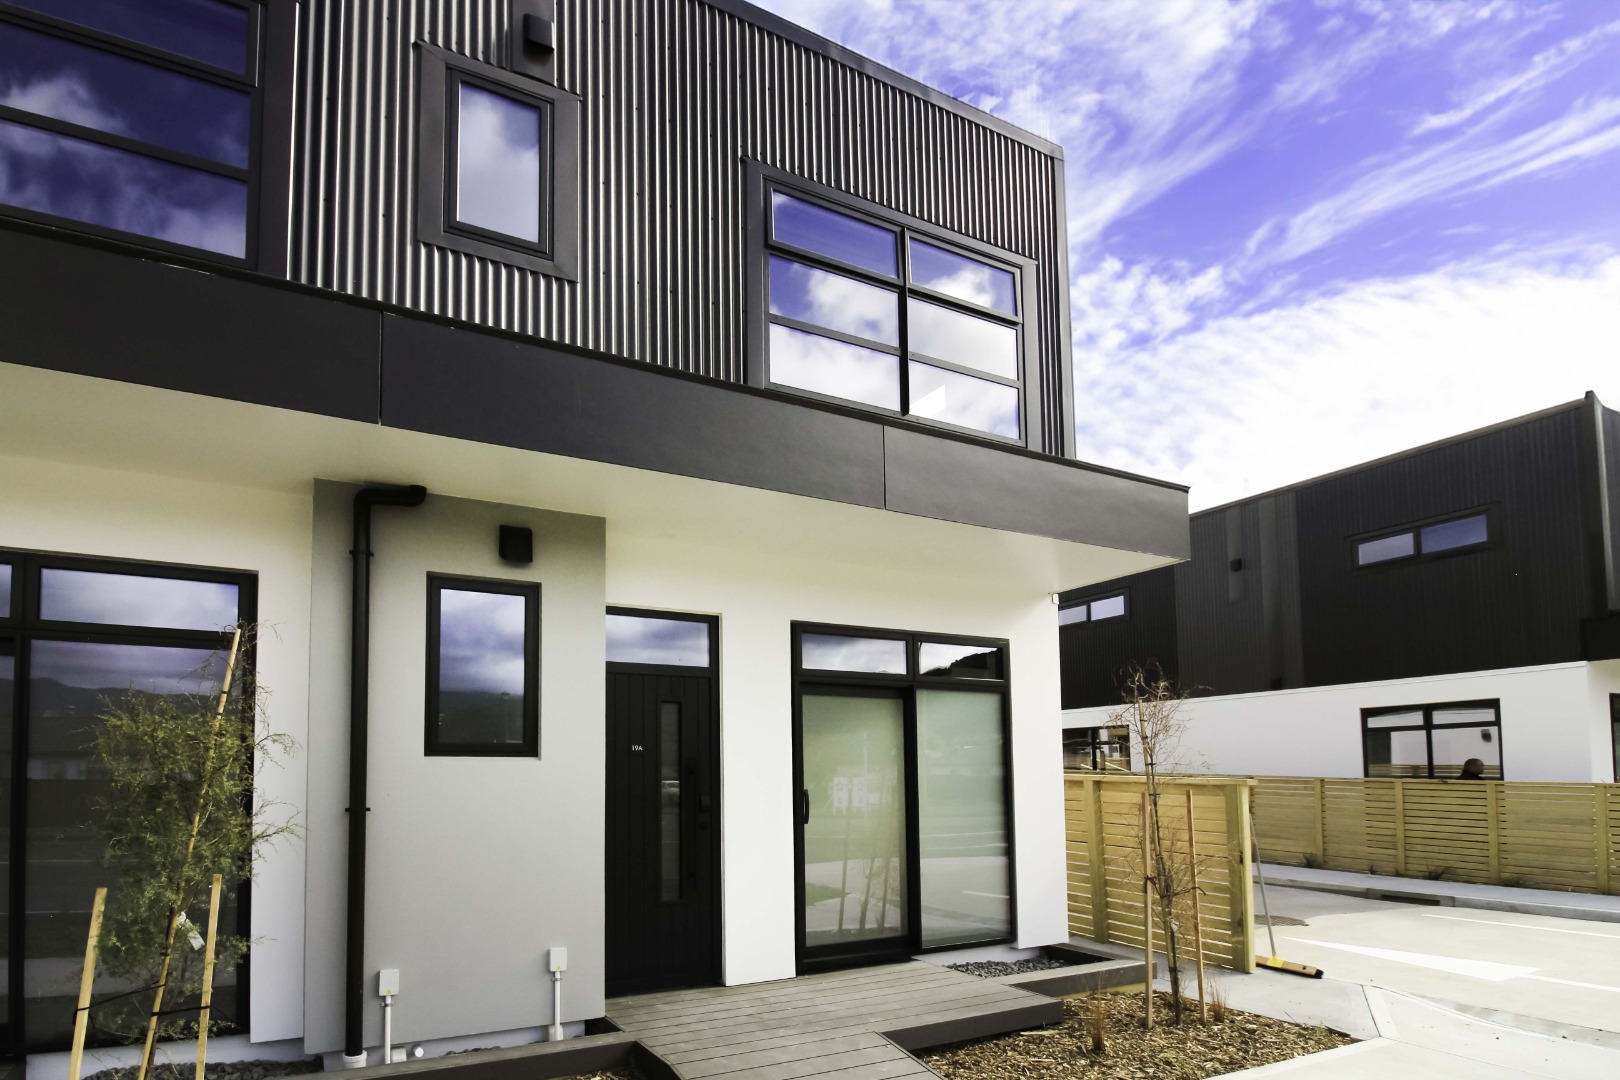 Real Estate For Rent Houses & Apartments : Brand new complex, Lower Hutt, Wellington